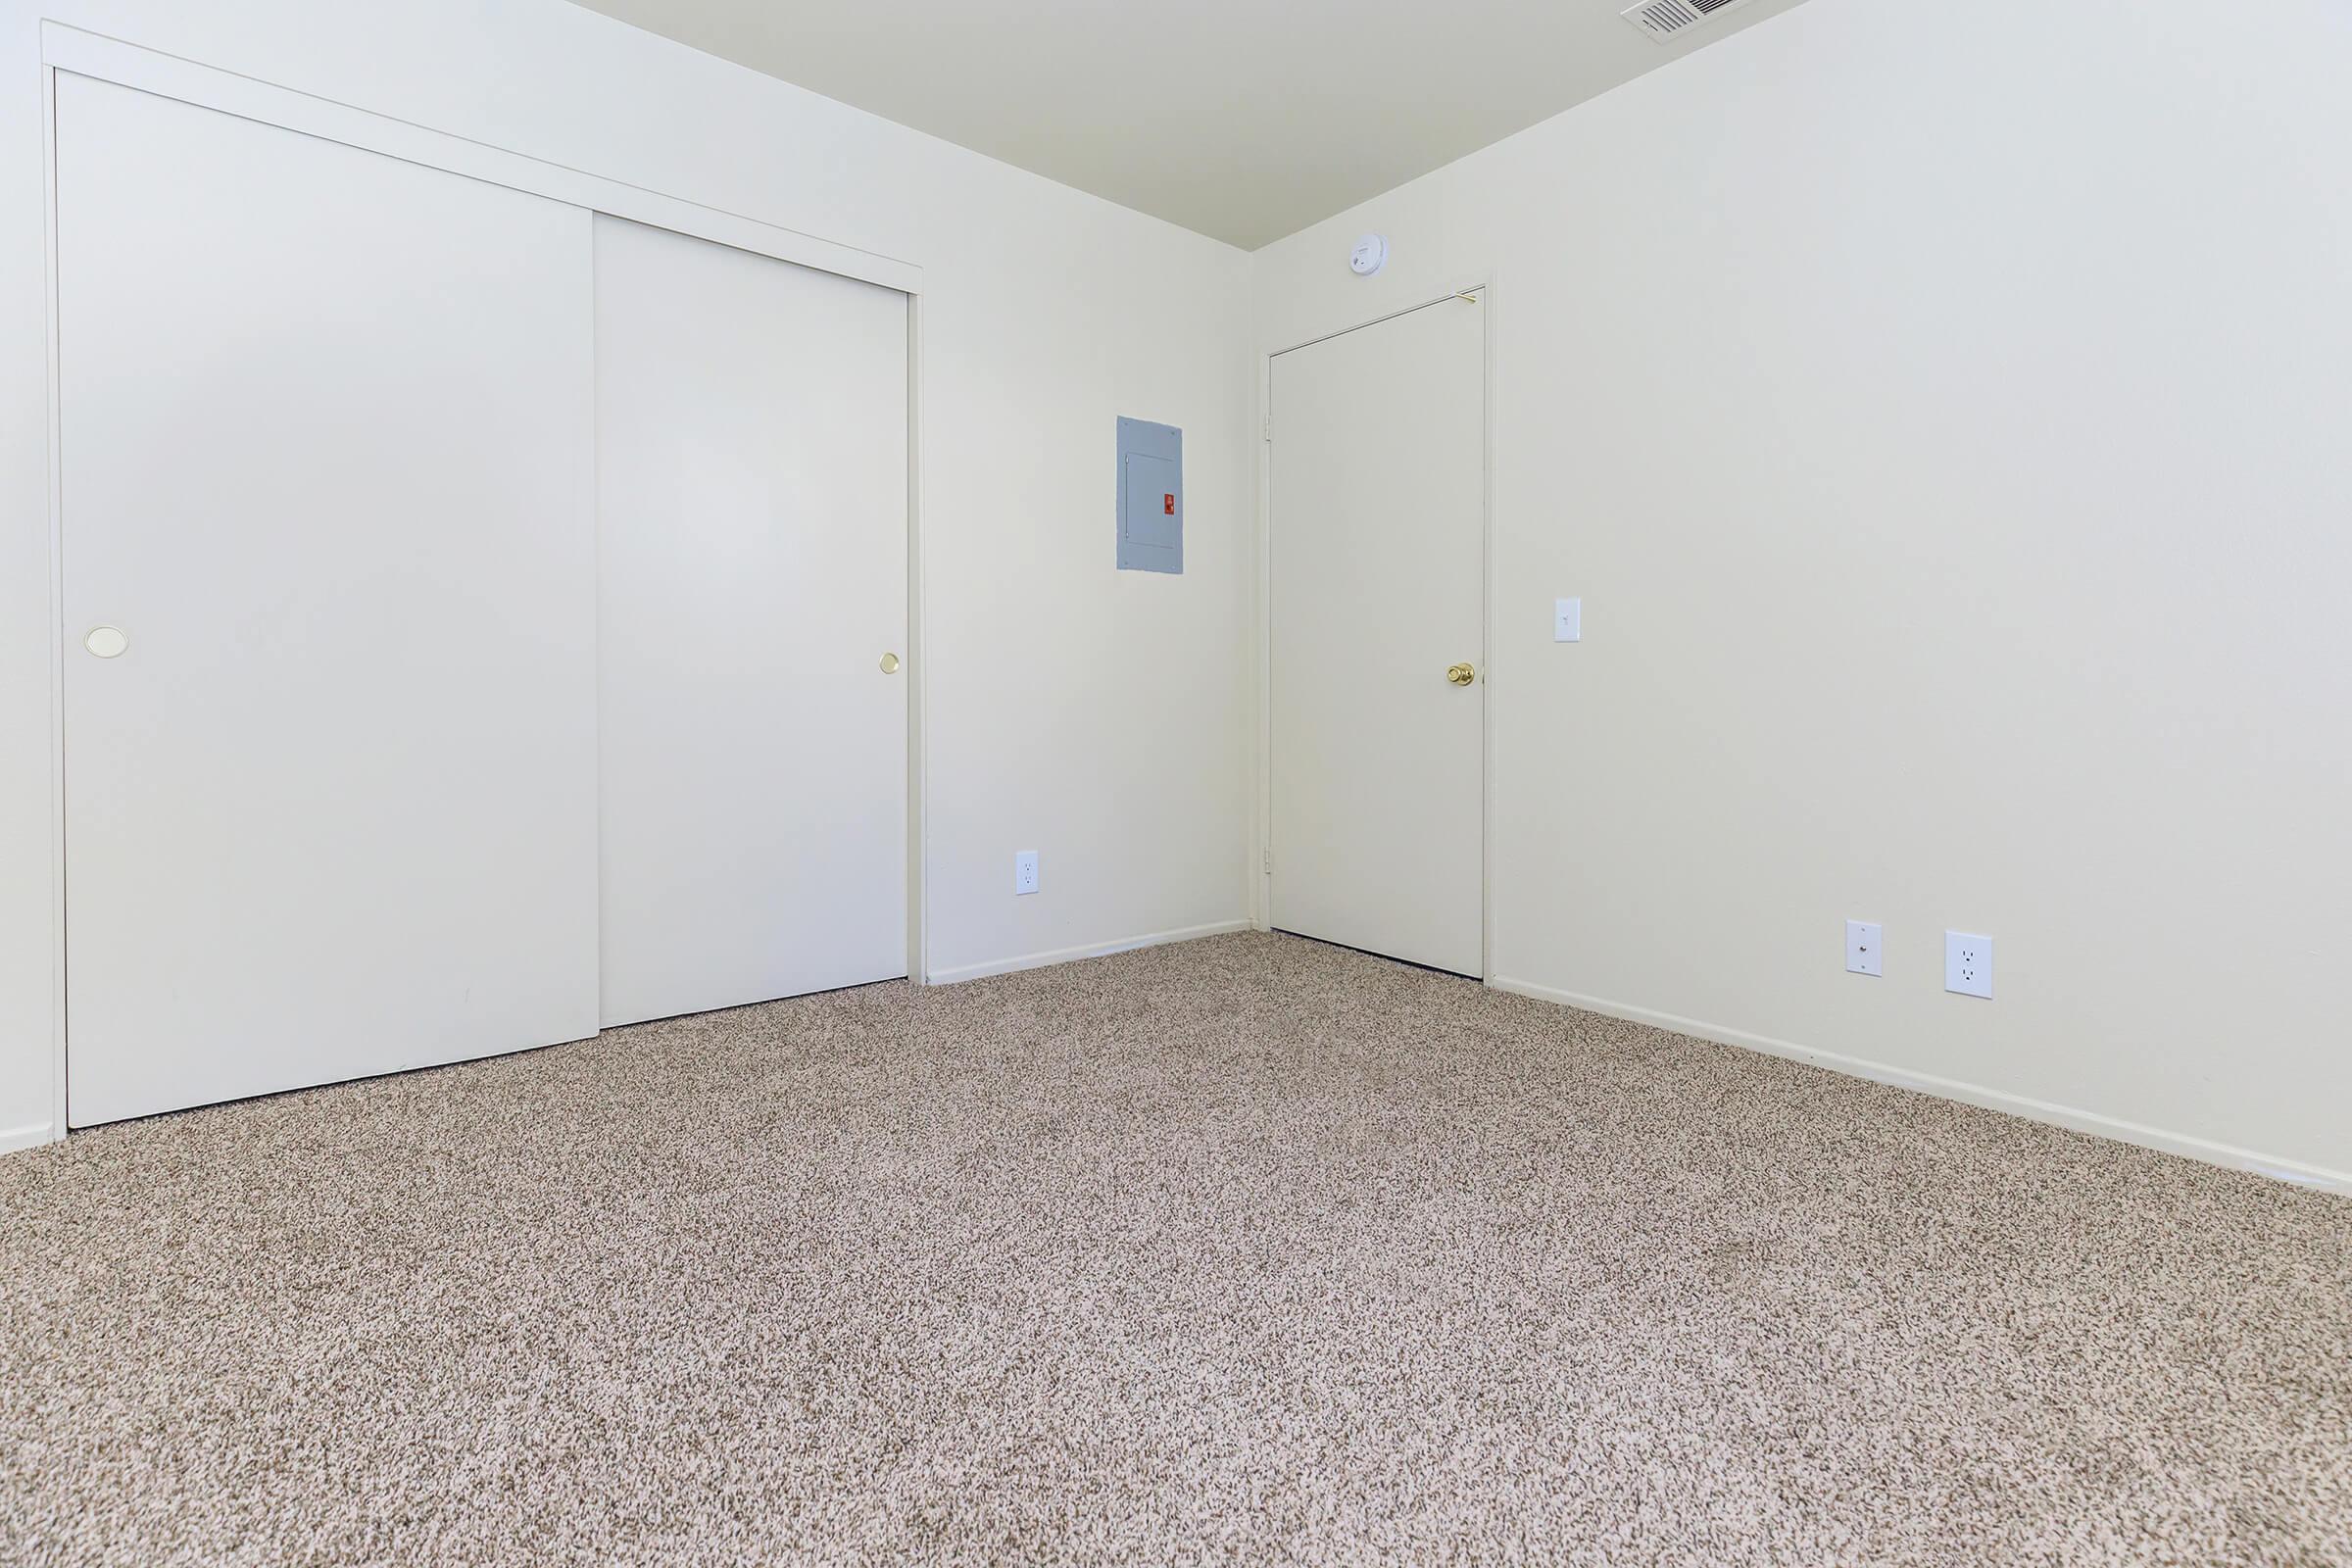 Carpeted bedroom with sliding closet doors